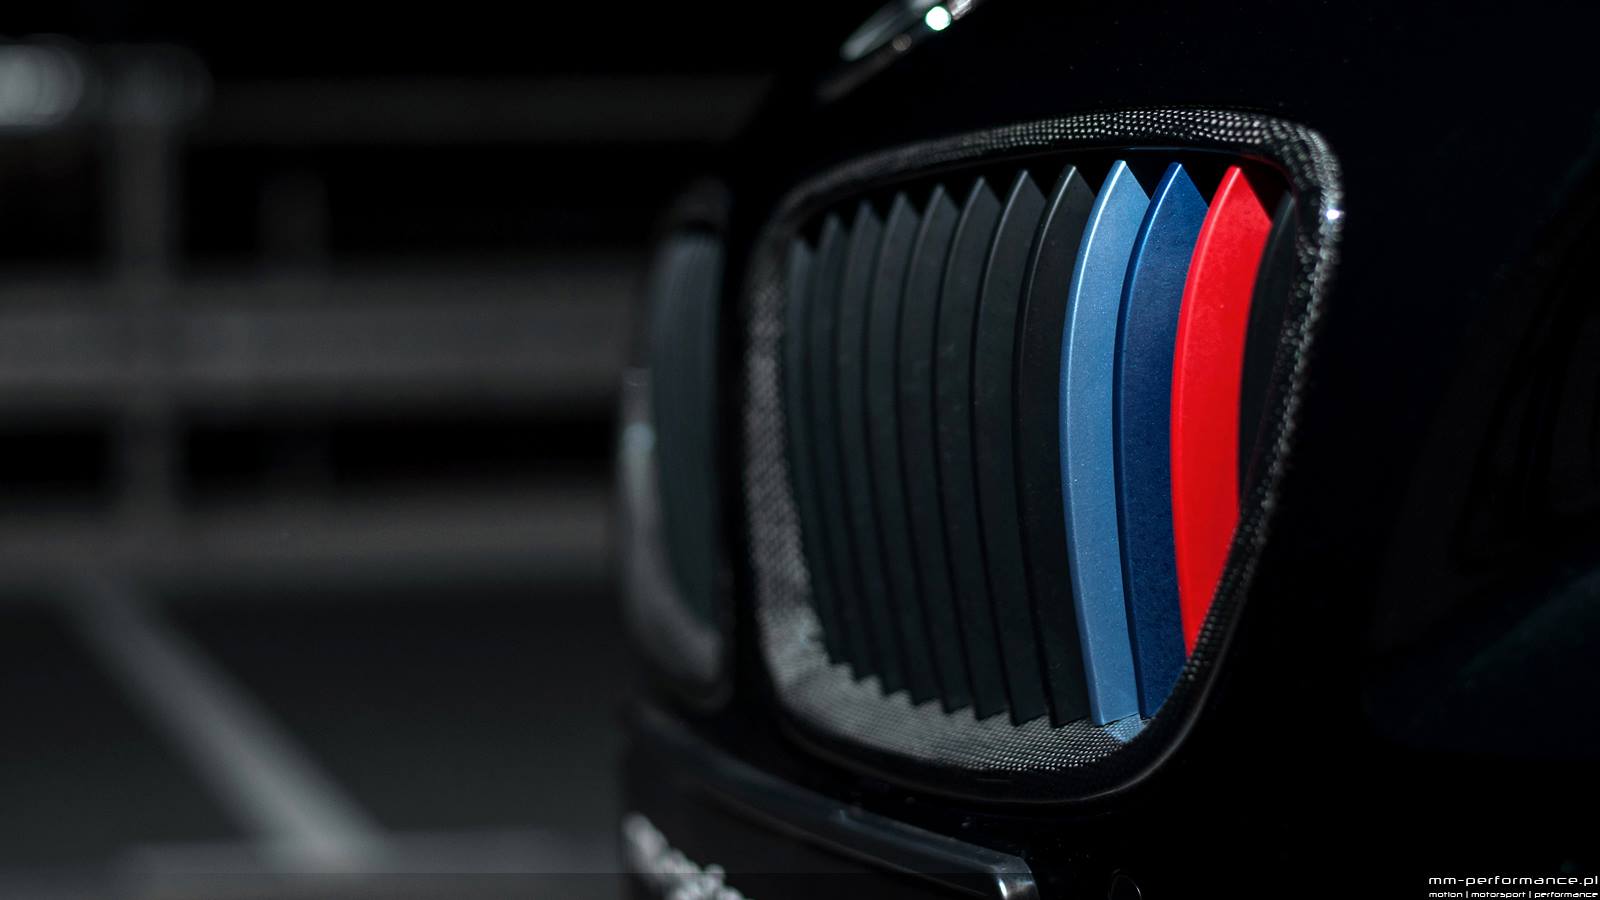 Bmw M Power Wallpapers